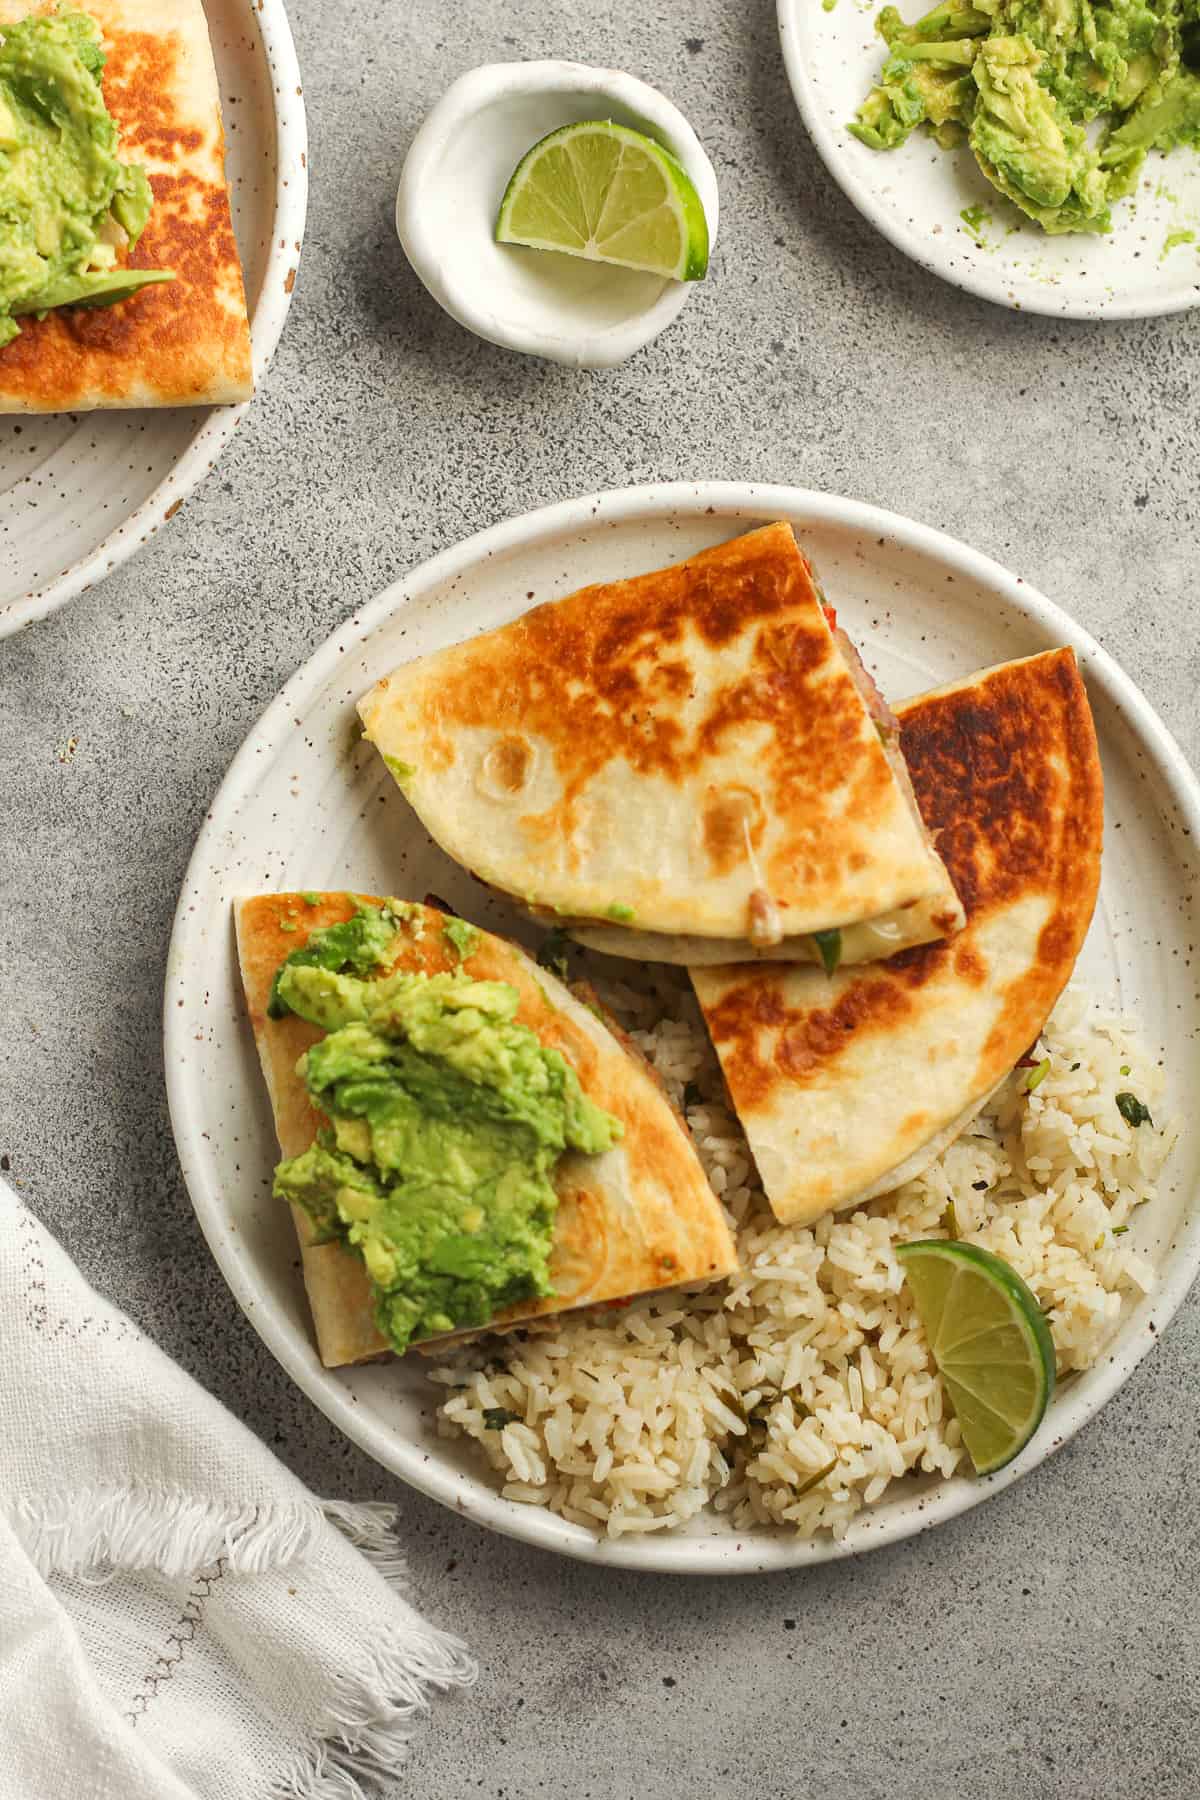 Overhead shot of a plate of quesadillas, with guacamole and rice.